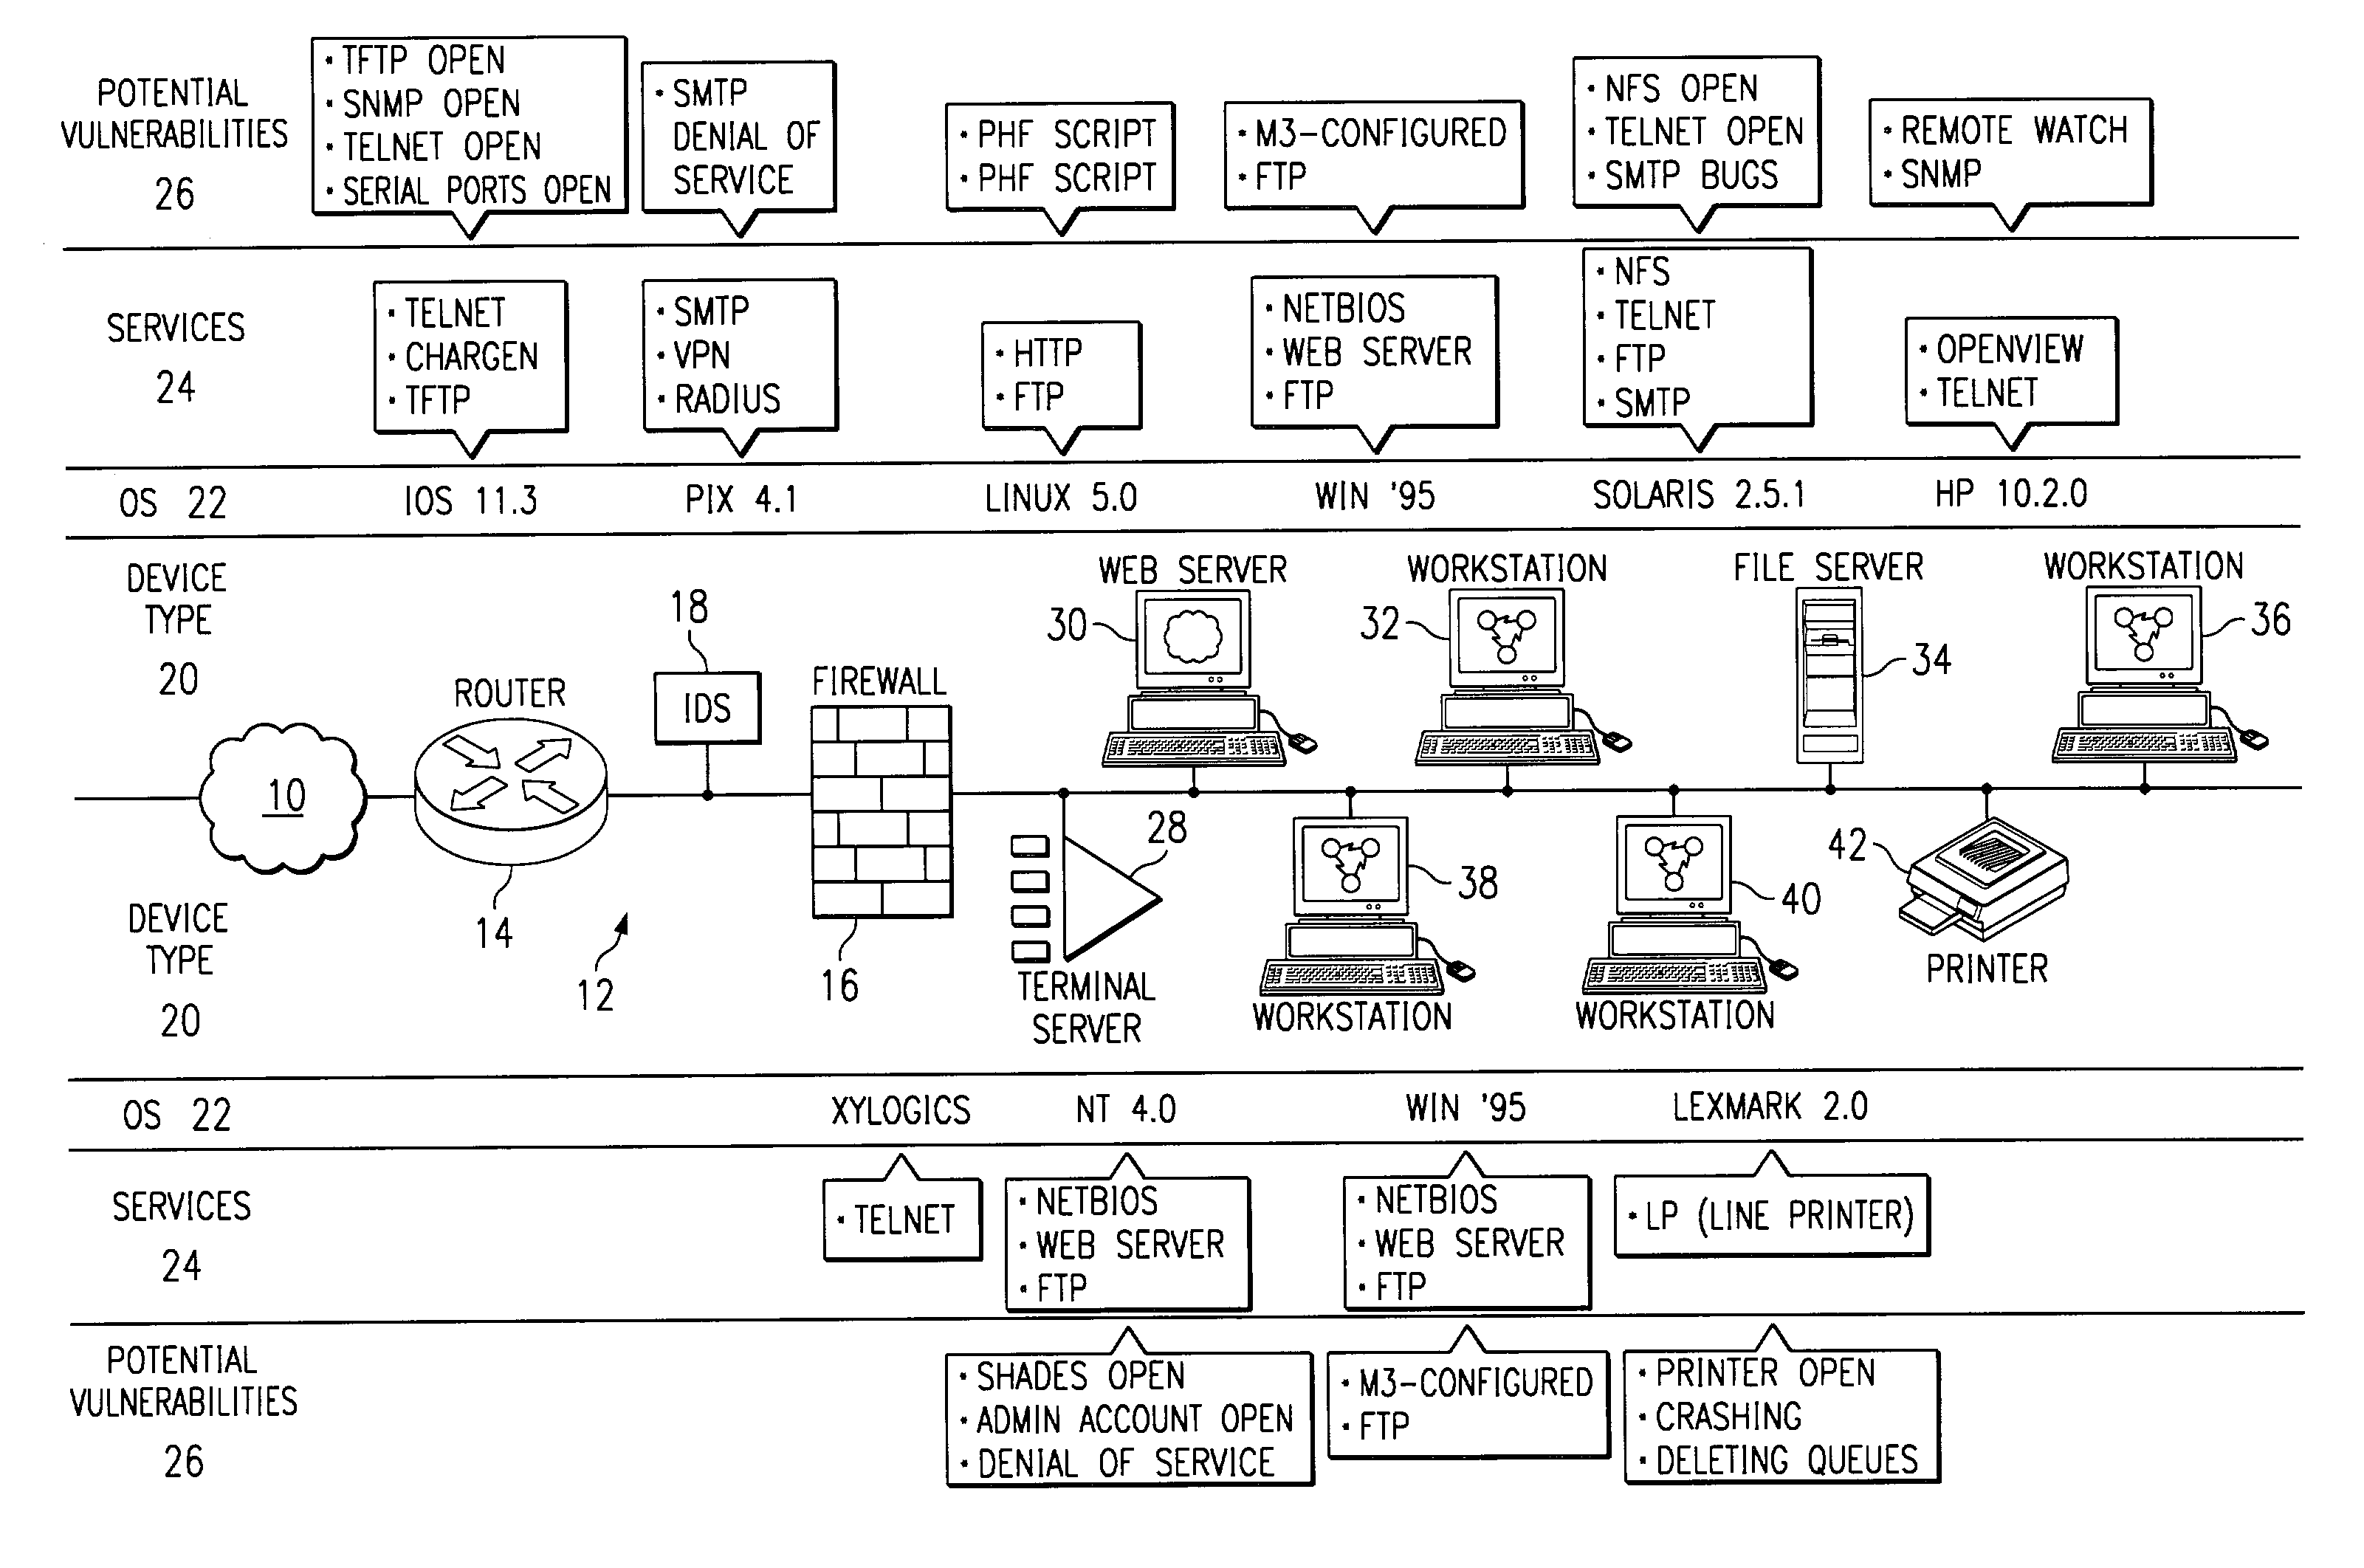 Method and system for mapping a network for system security